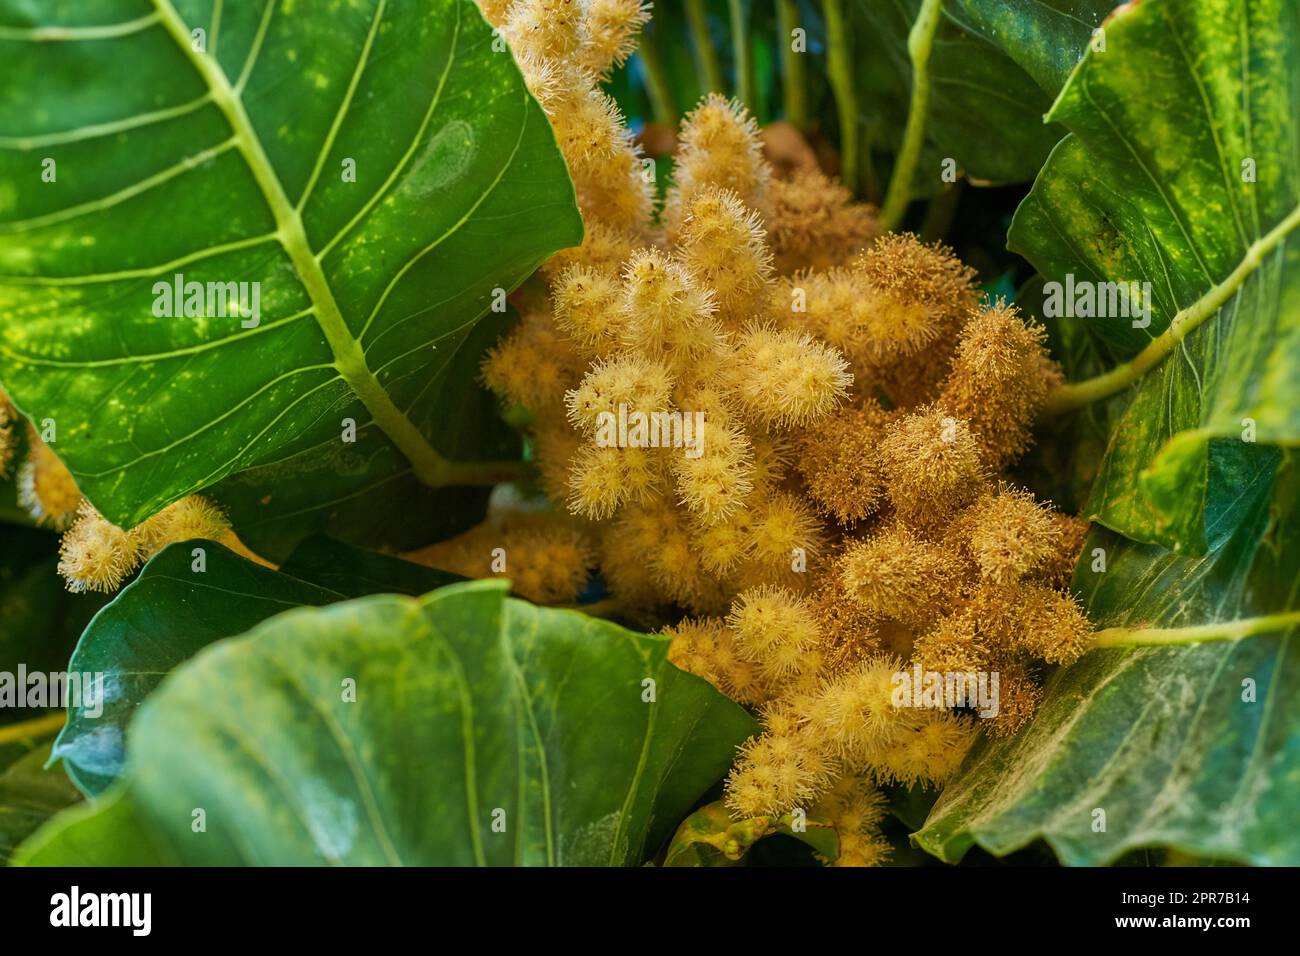 Golden chestnut tree with spiny fruit, Chinquapin plant. Vibrant leaves and palm fruit growing in a remote location in nature on a sunny day. Closeup detail of weird nuts between leaves in a forest Stock Photo